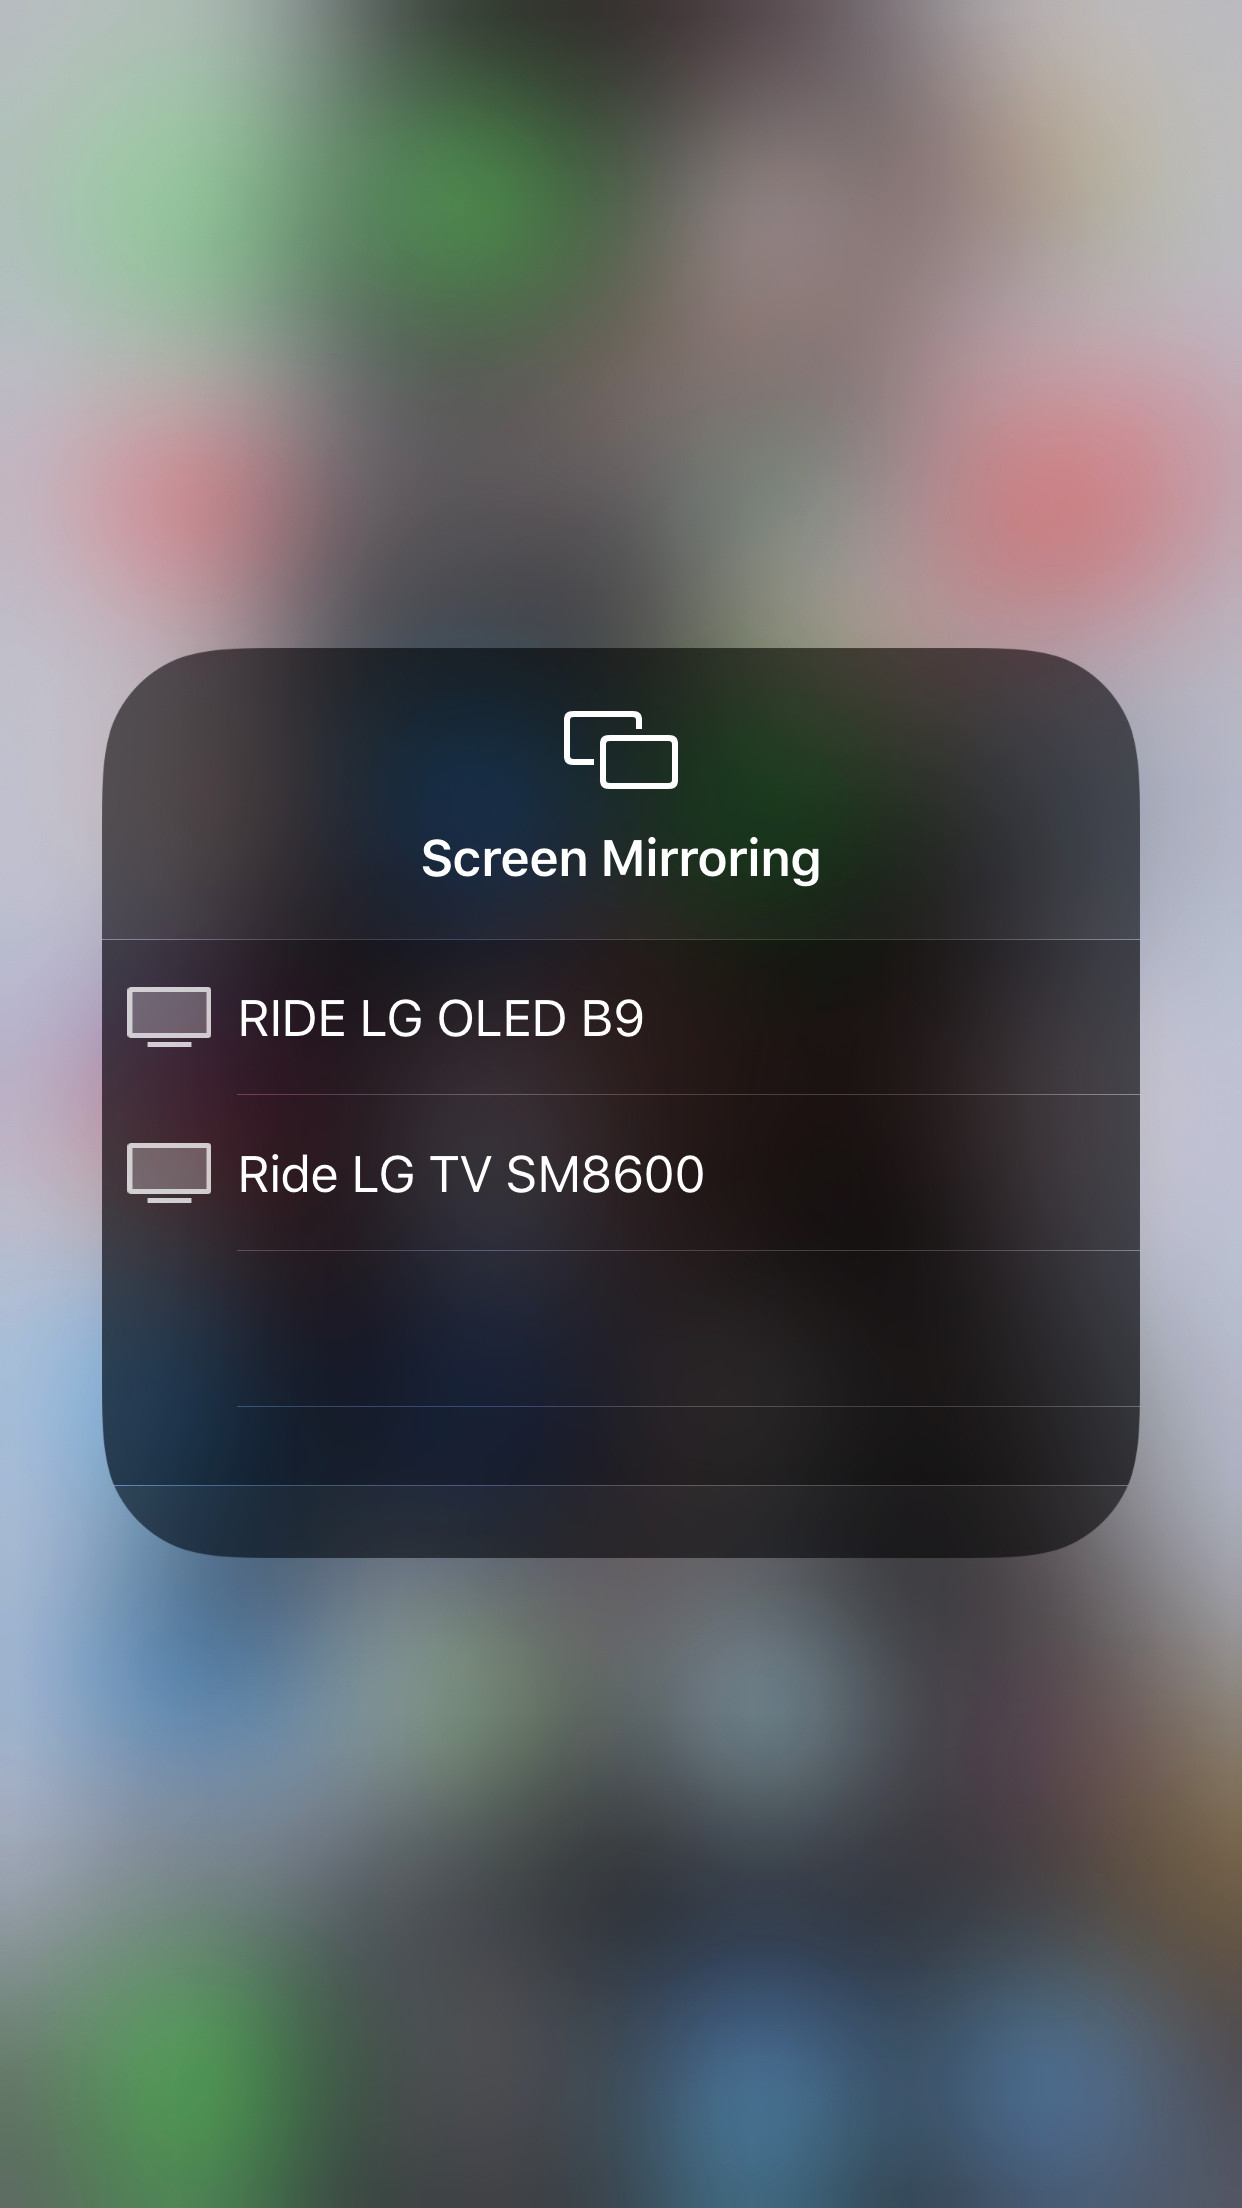 Remove Old Devices At Airplay Macos And, How To Screen Mirror Iphone Old Lg Tv